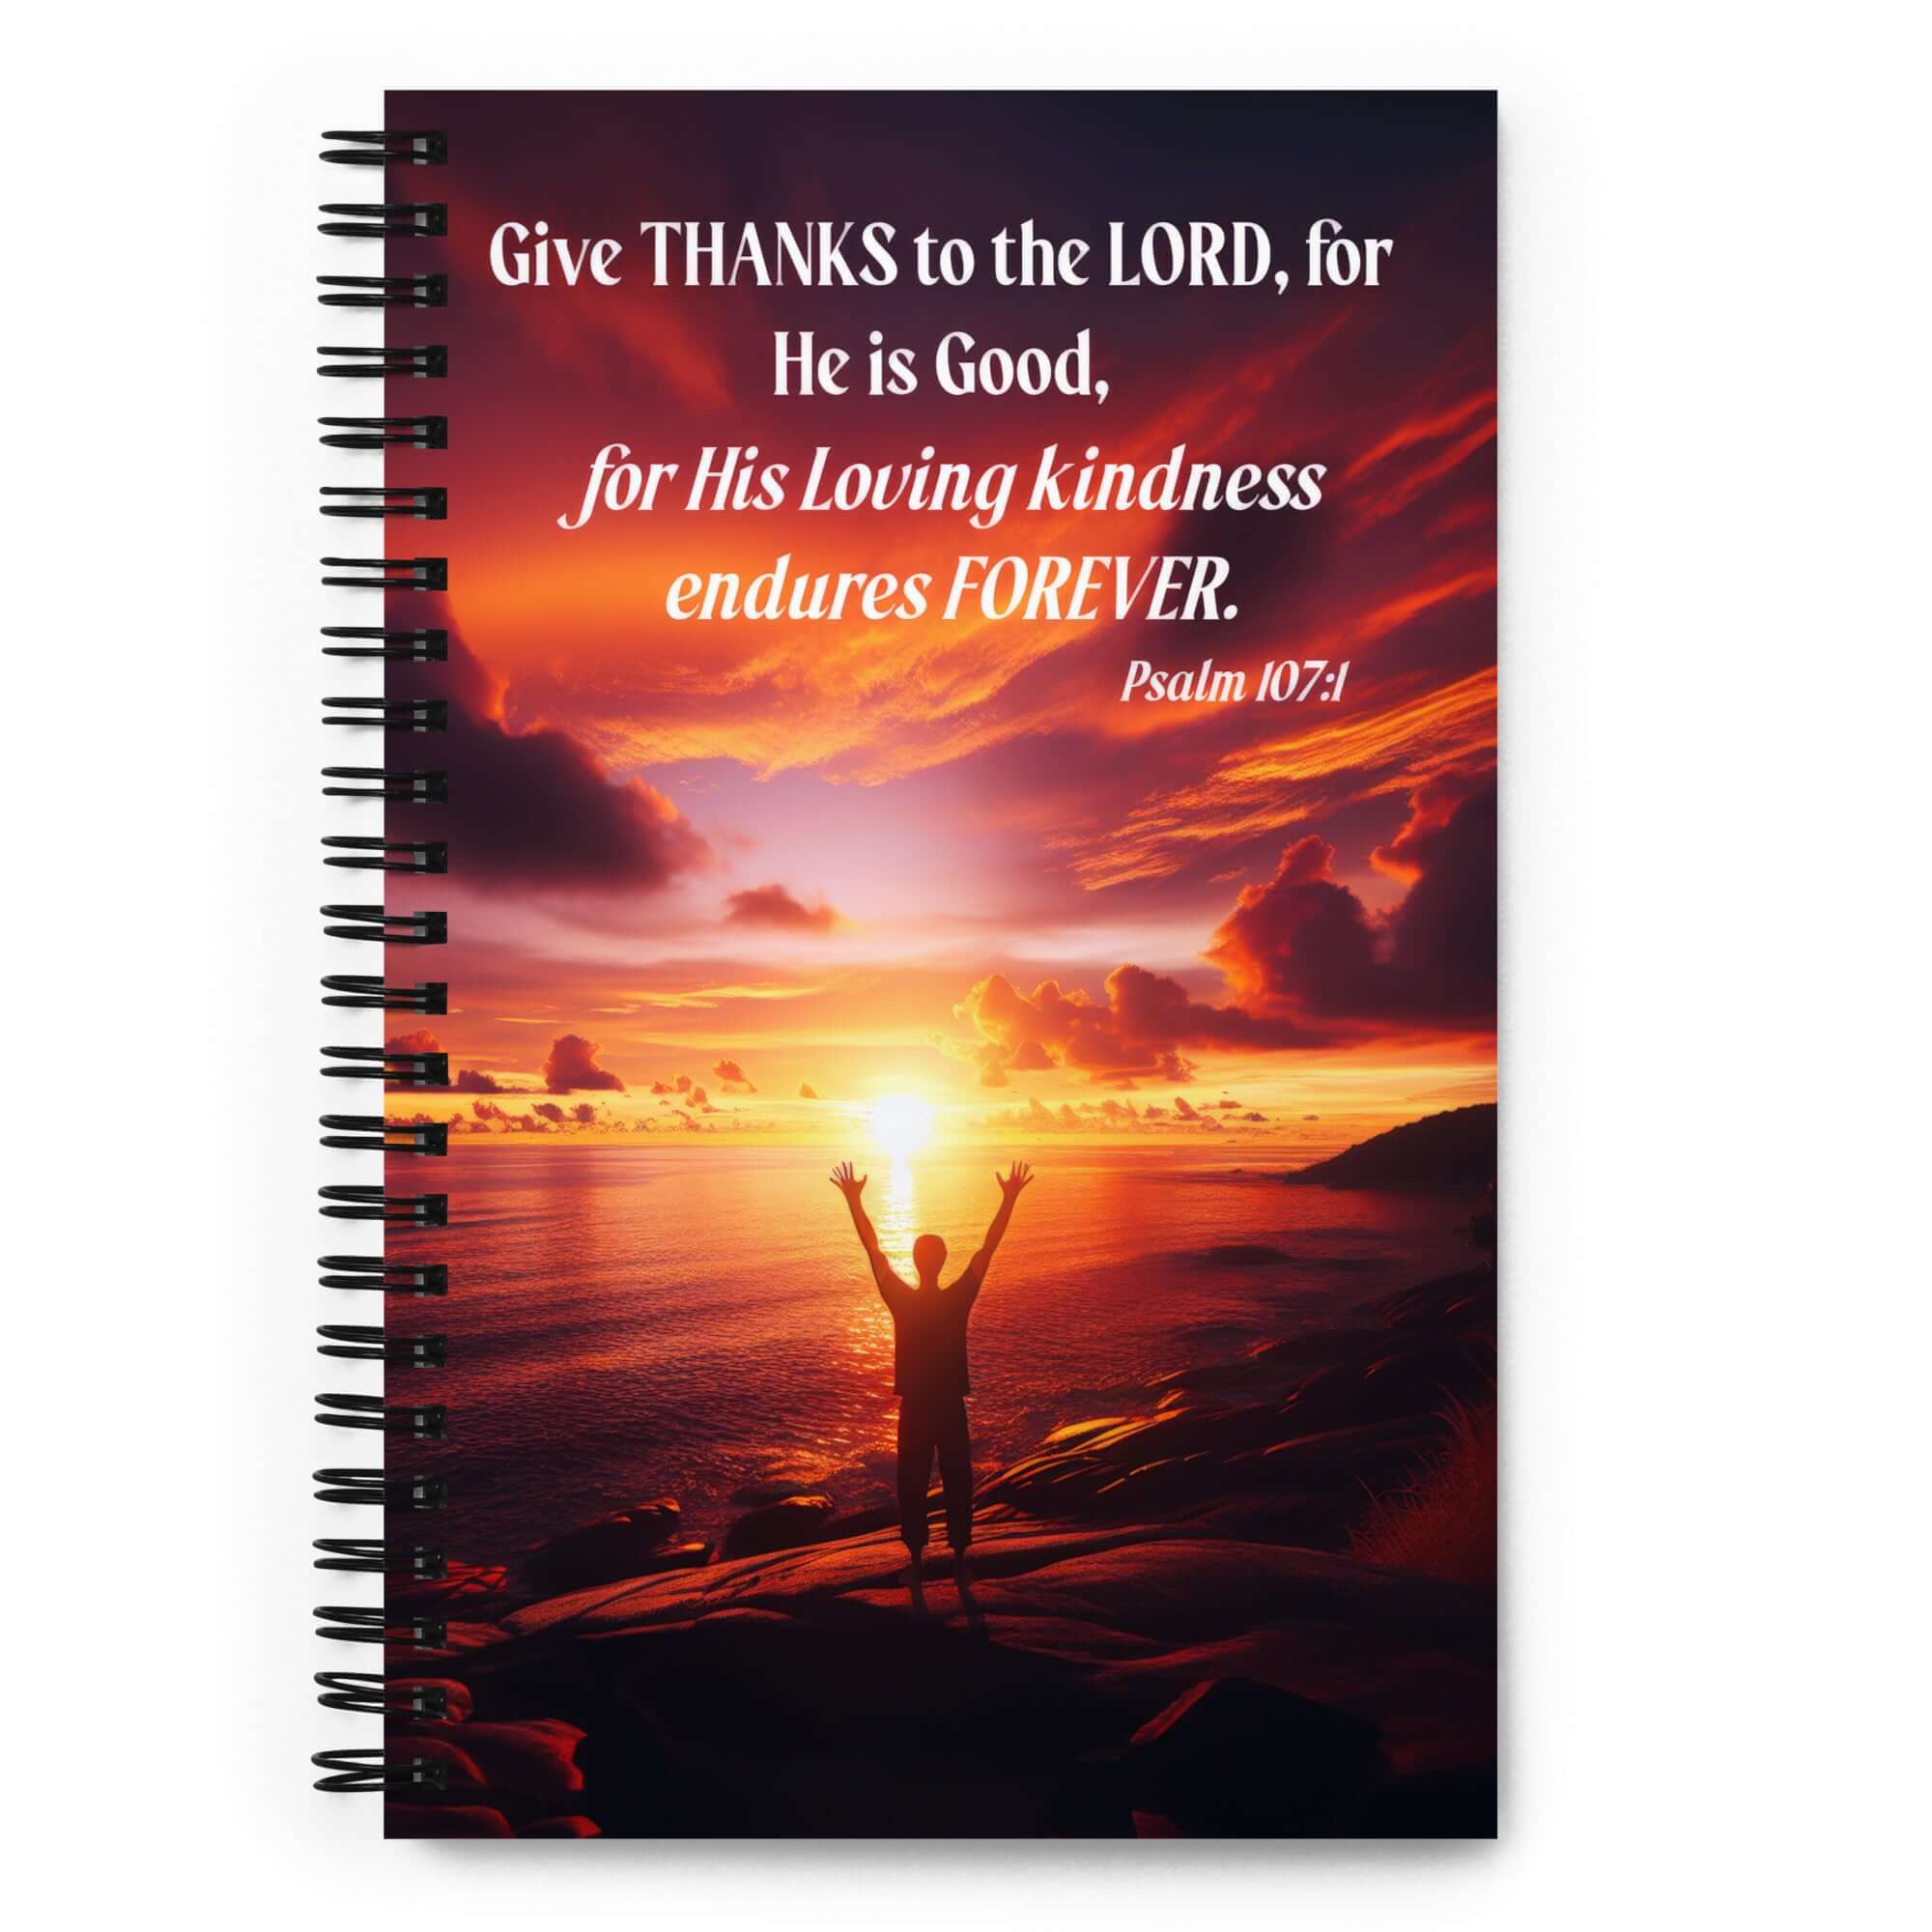 Psalm 107:1 - Bible Verse, Give Thanks to the Lord Spiral Notebook